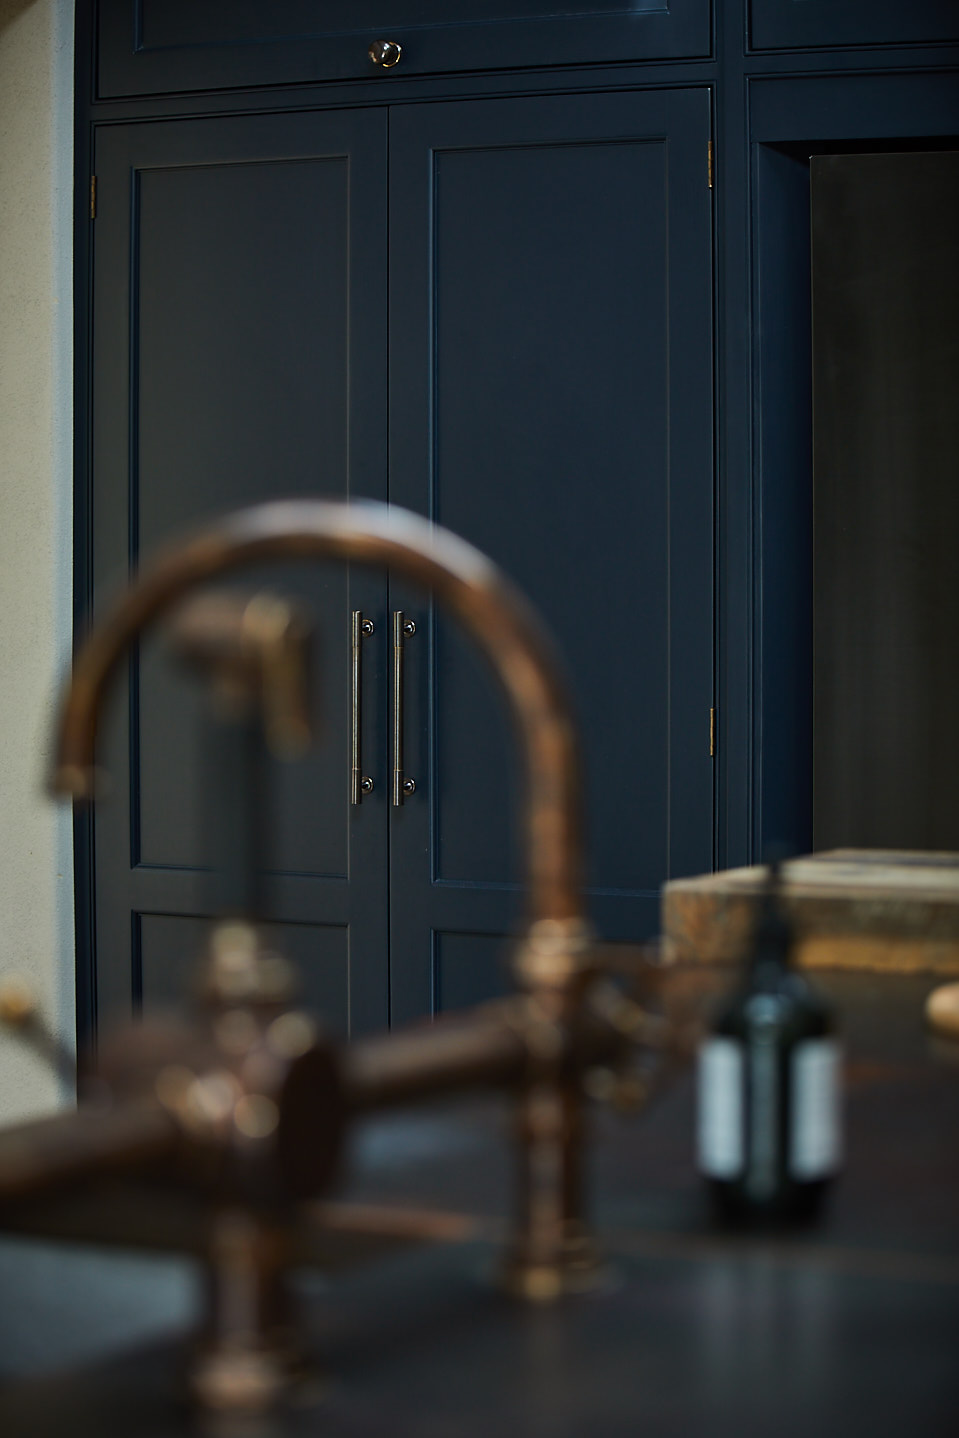 Dark blue painted bespoke kitchen cabinets with aged antique tap